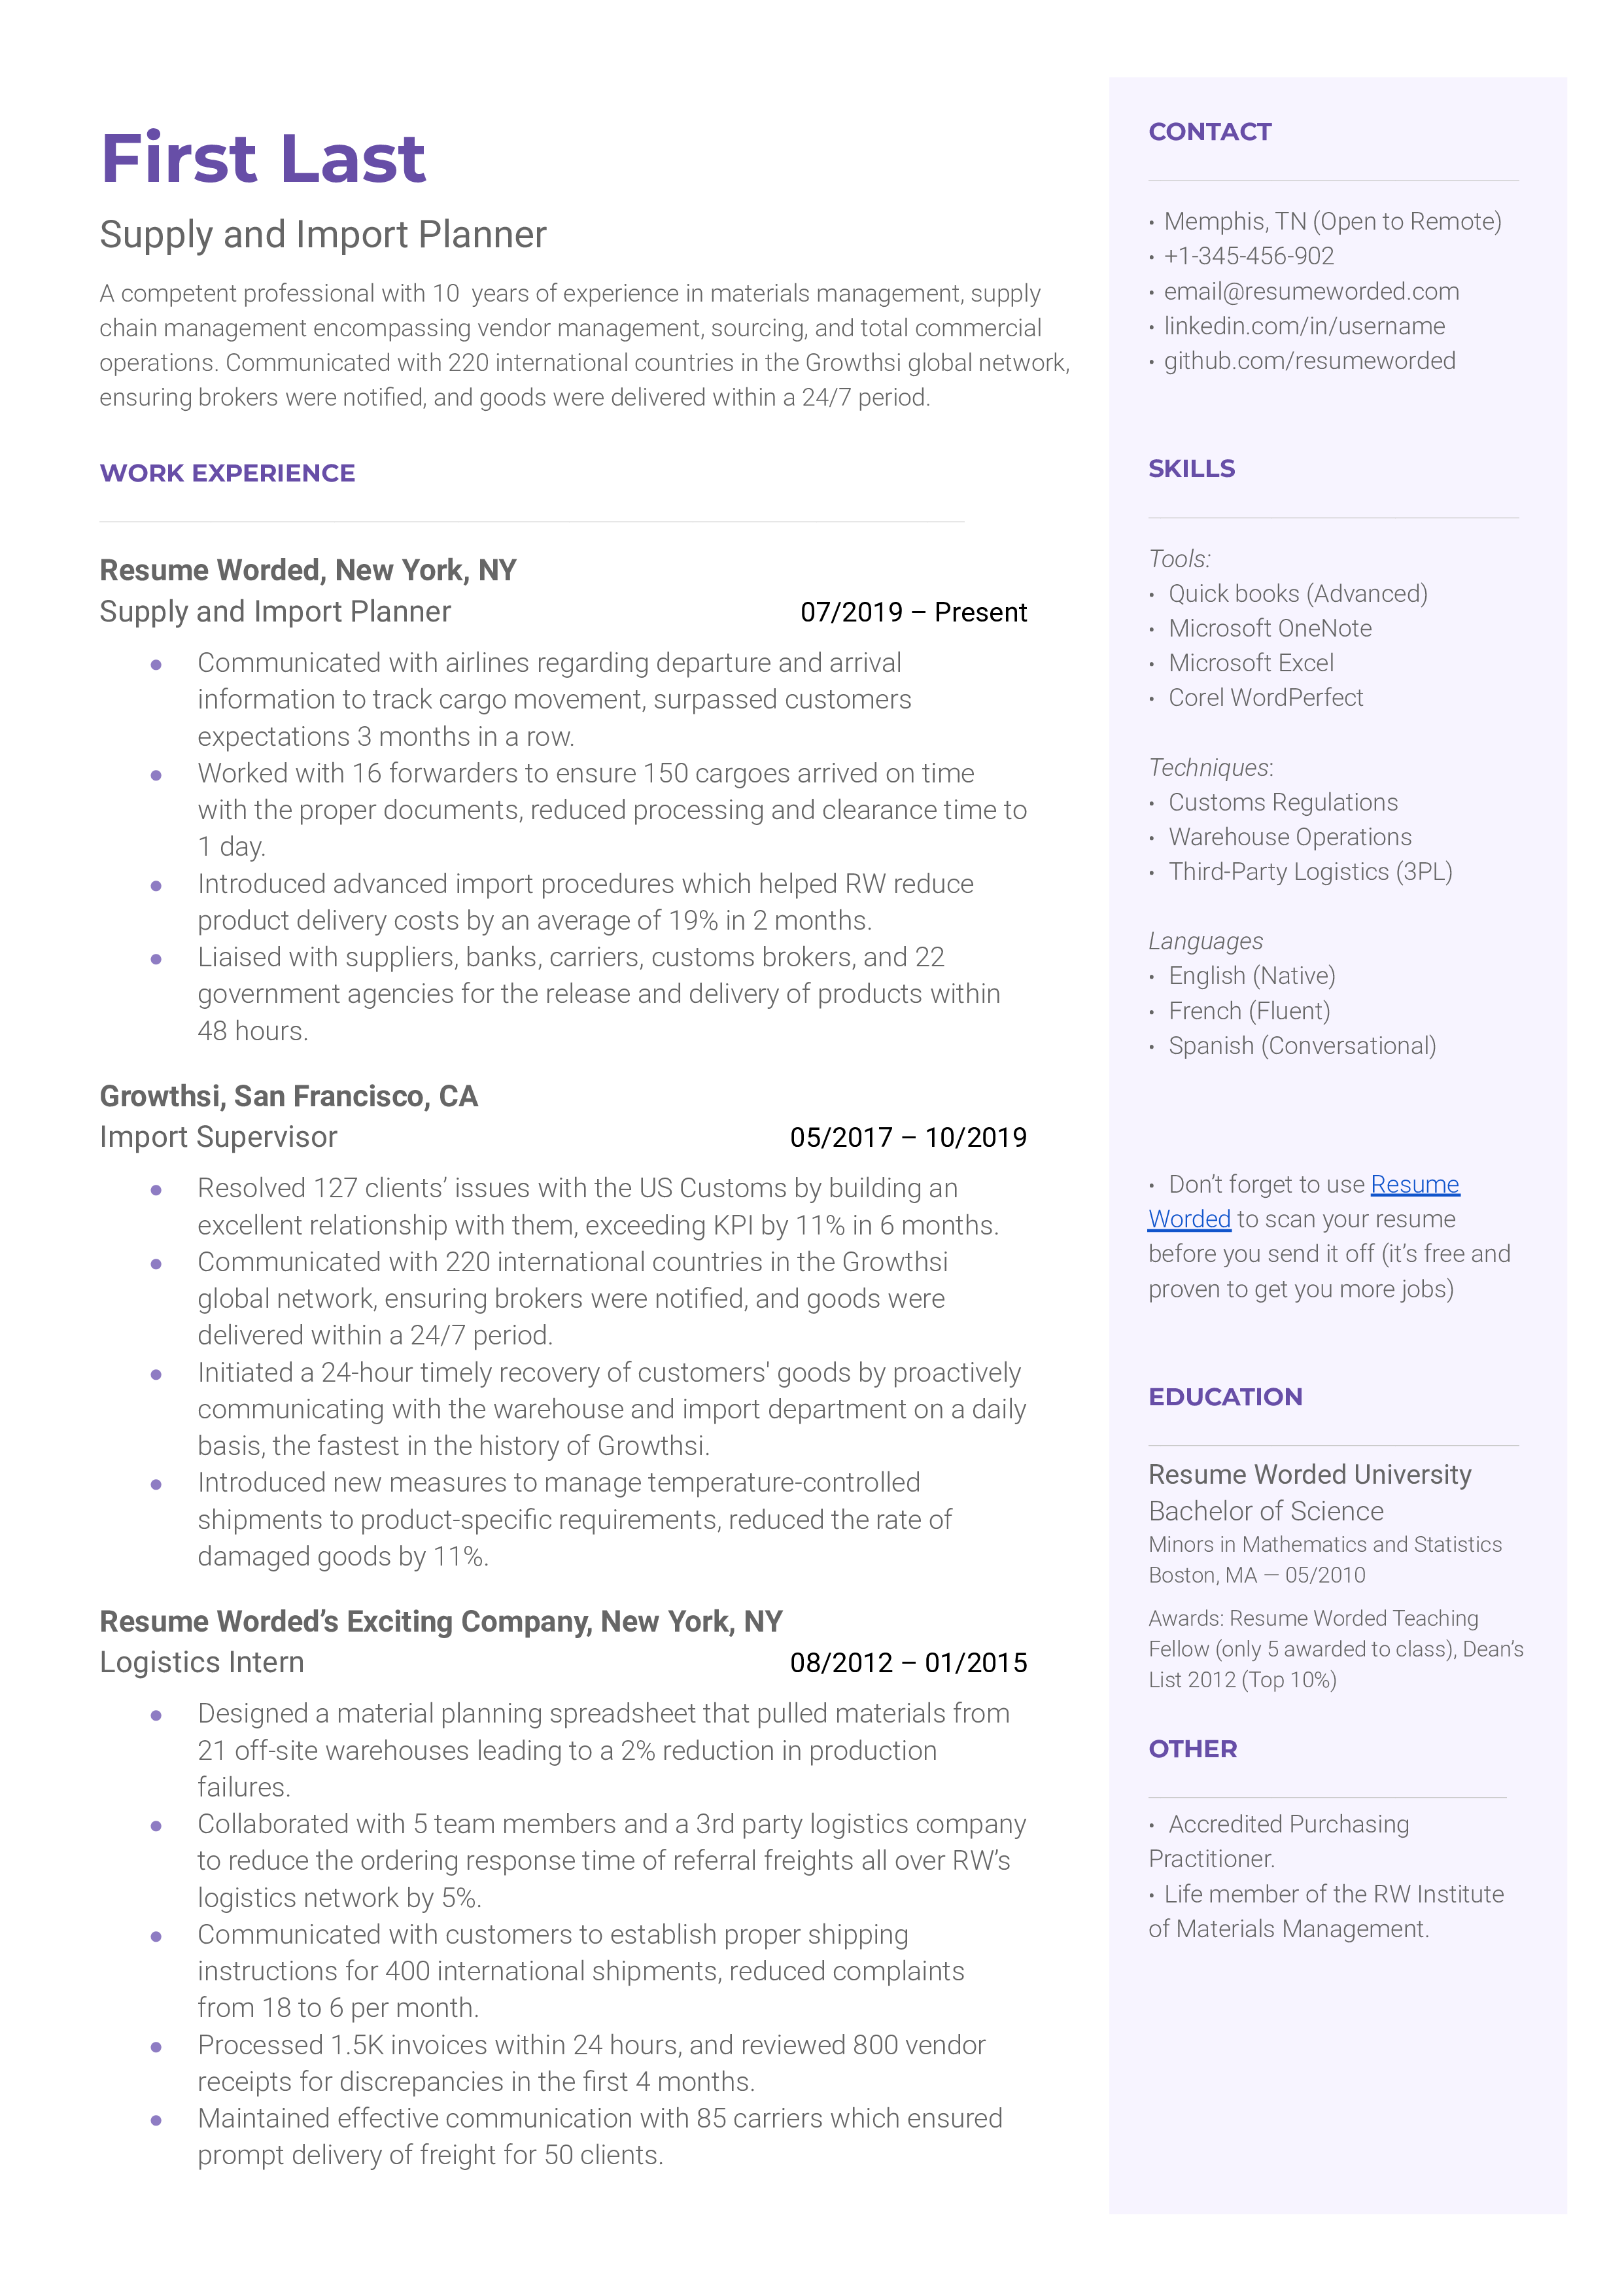 Supply and Import Planner Resume Template + Example